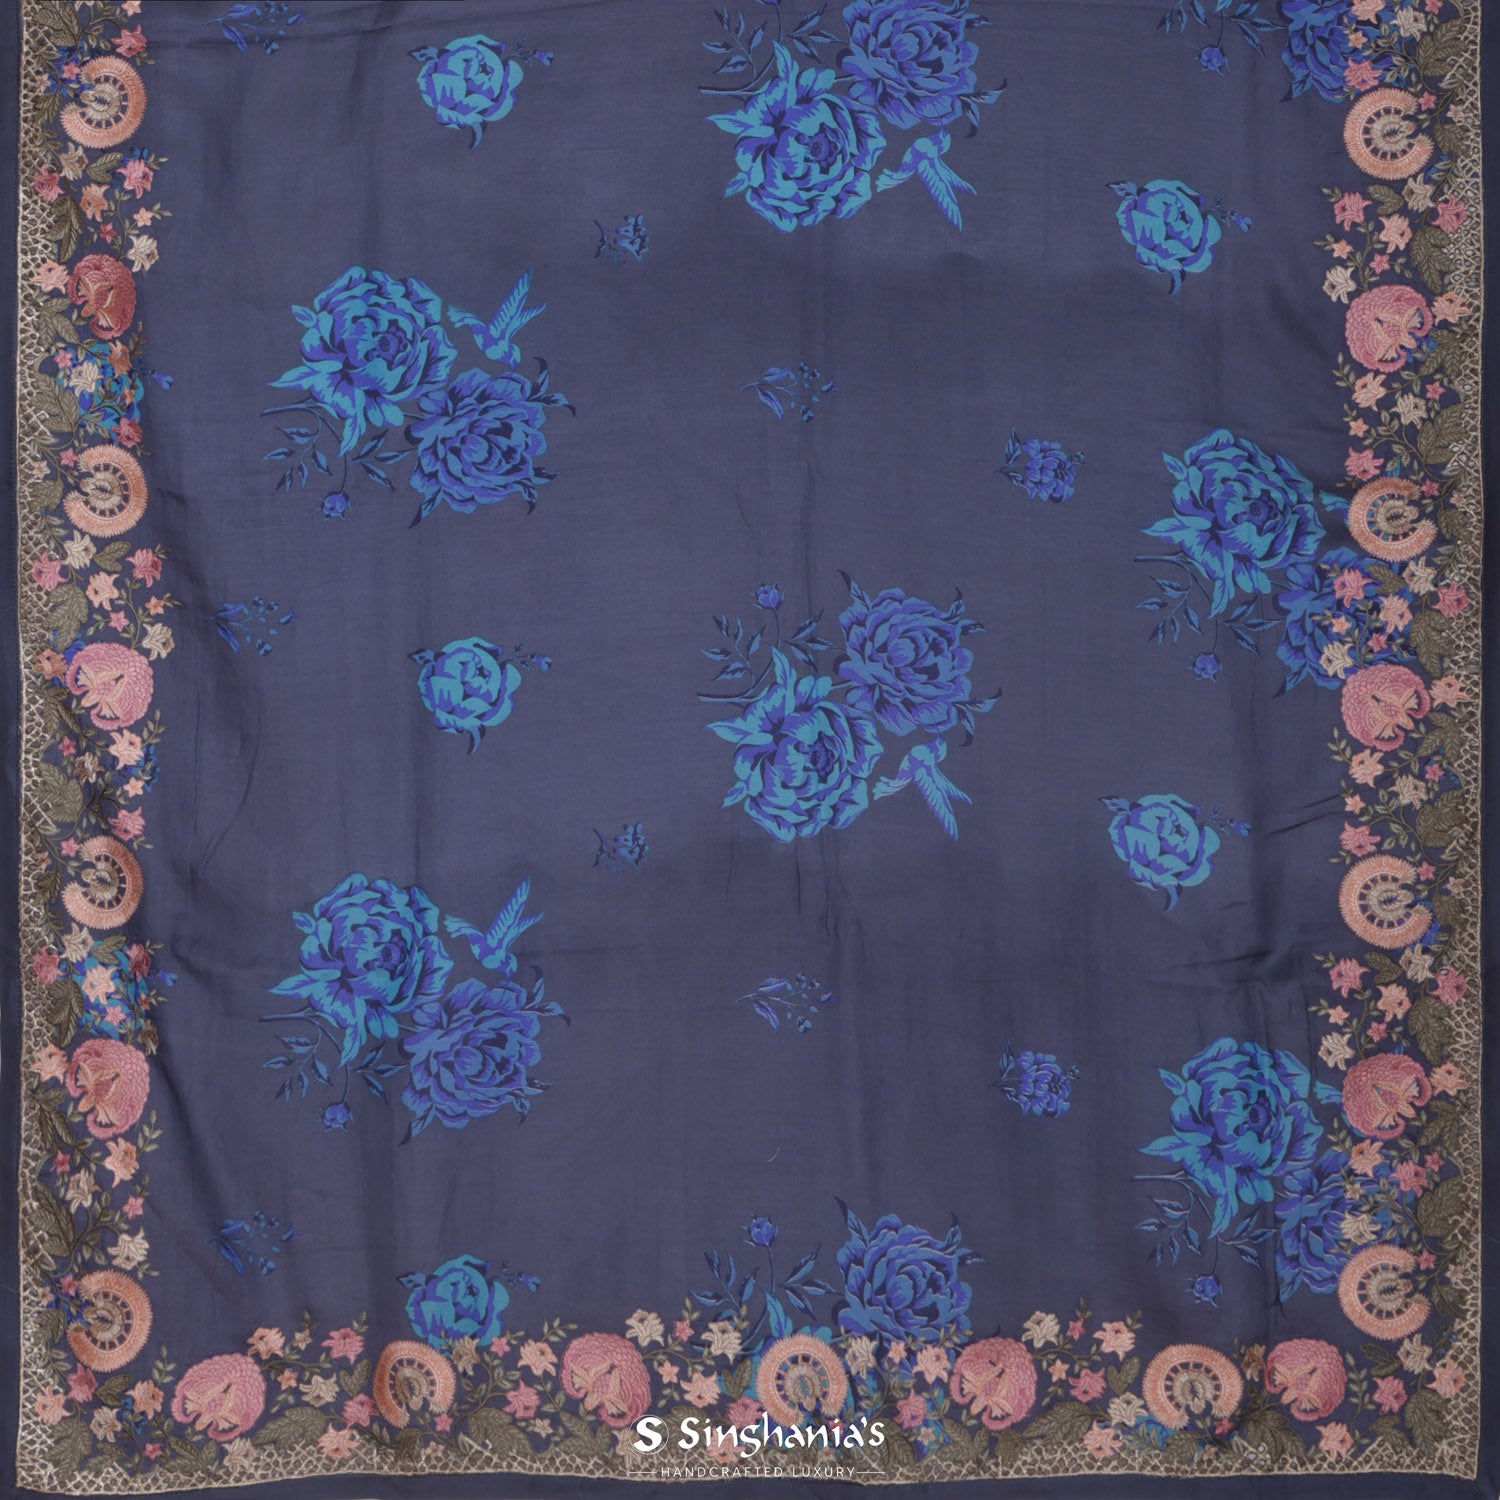 Berry Blue Printed Satin Saree With Thread Embroidery Border